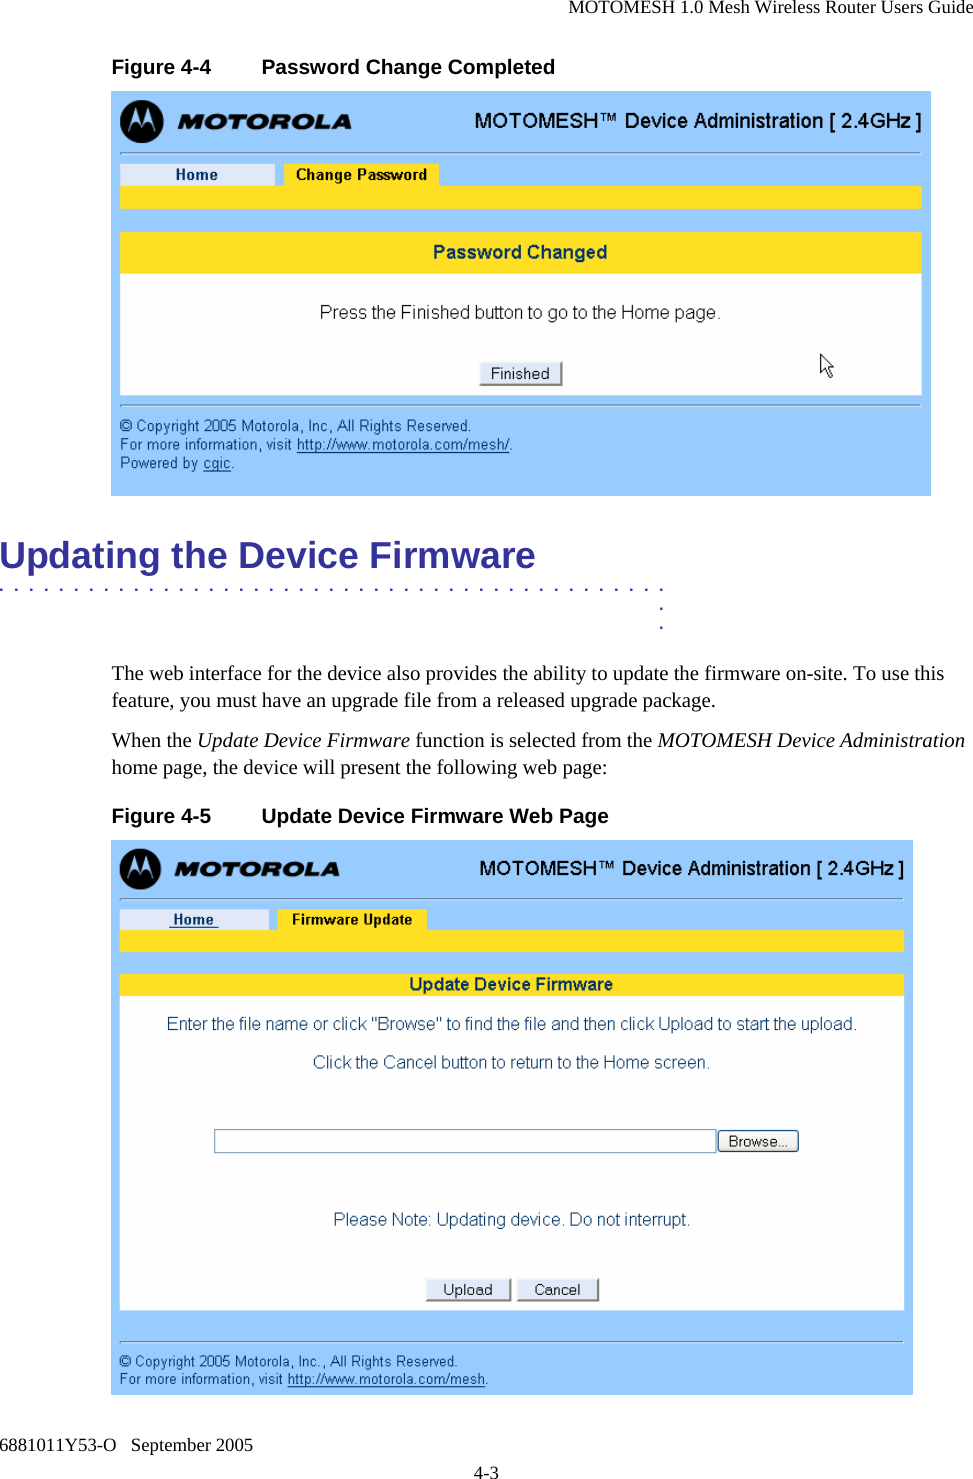 MOTOMESH 1.0 Mesh Wireless Router Users Guide 6881011Y53-O   September 2005 4-3 Figure 4-4  Password Change Completed   Updating the Device Firmware .............................................  .  . The web interface for the device also provides the ability to update the firmware on-site. To use this feature, you must have an upgrade file from a released upgrade package. When the Update Device Firmware function is selected from the MOTOMESH Device Administration home page, the device will present the following web page: Figure 4-5  Update Device Firmware Web Page  